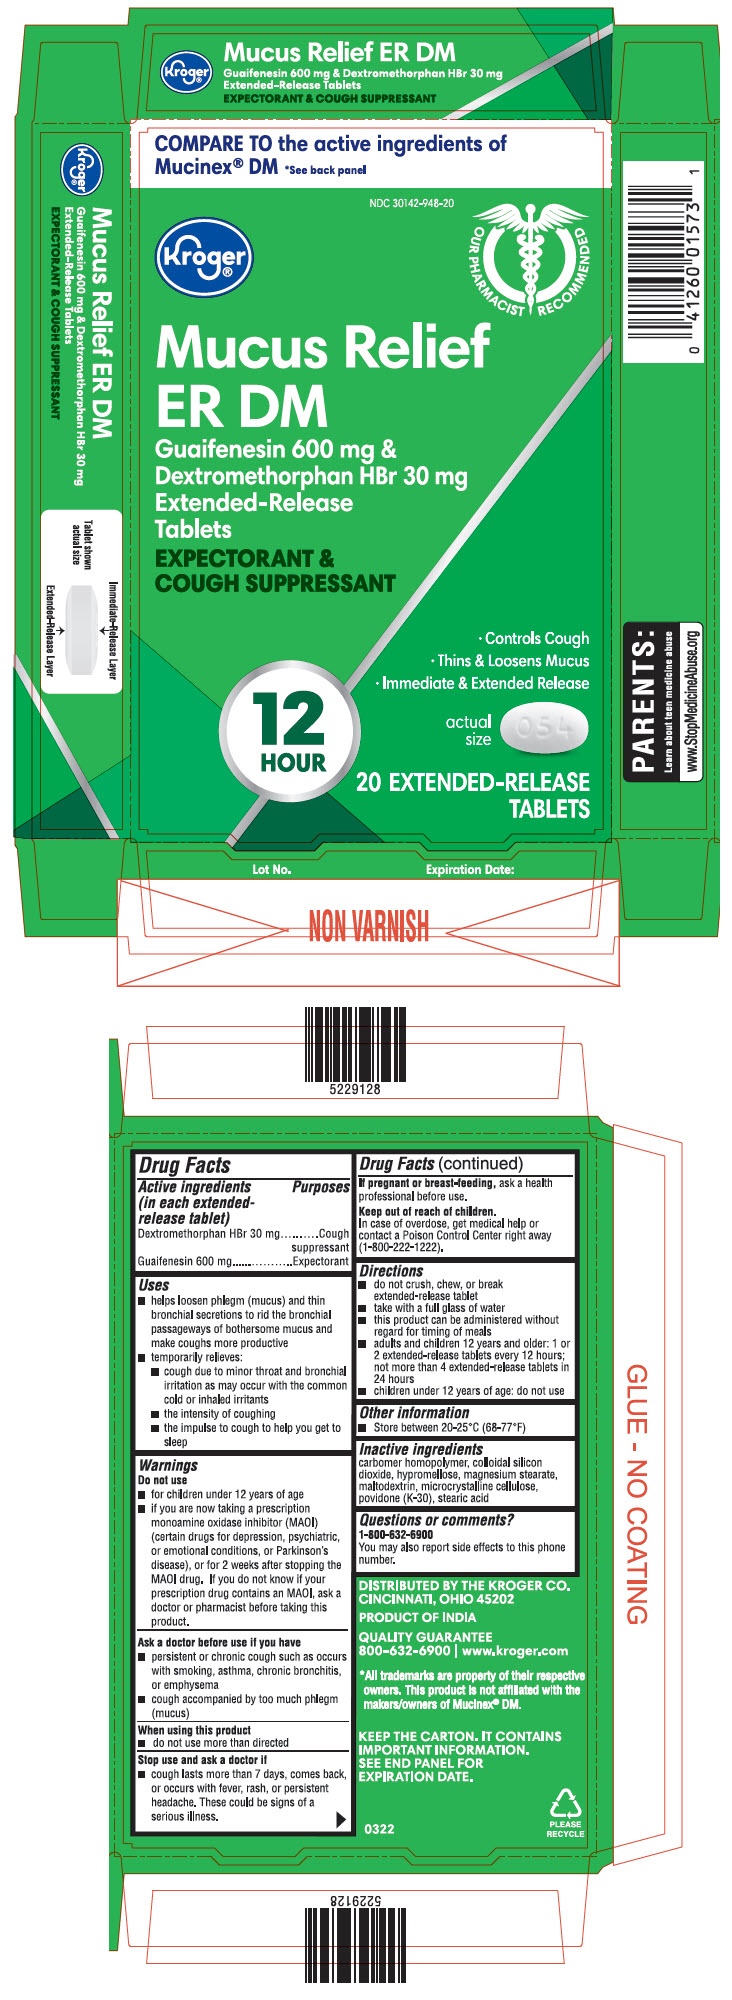 PRINCIPAL DISPLAY PANEL - 20 Extended-Release Tablet Blister Pack Carton